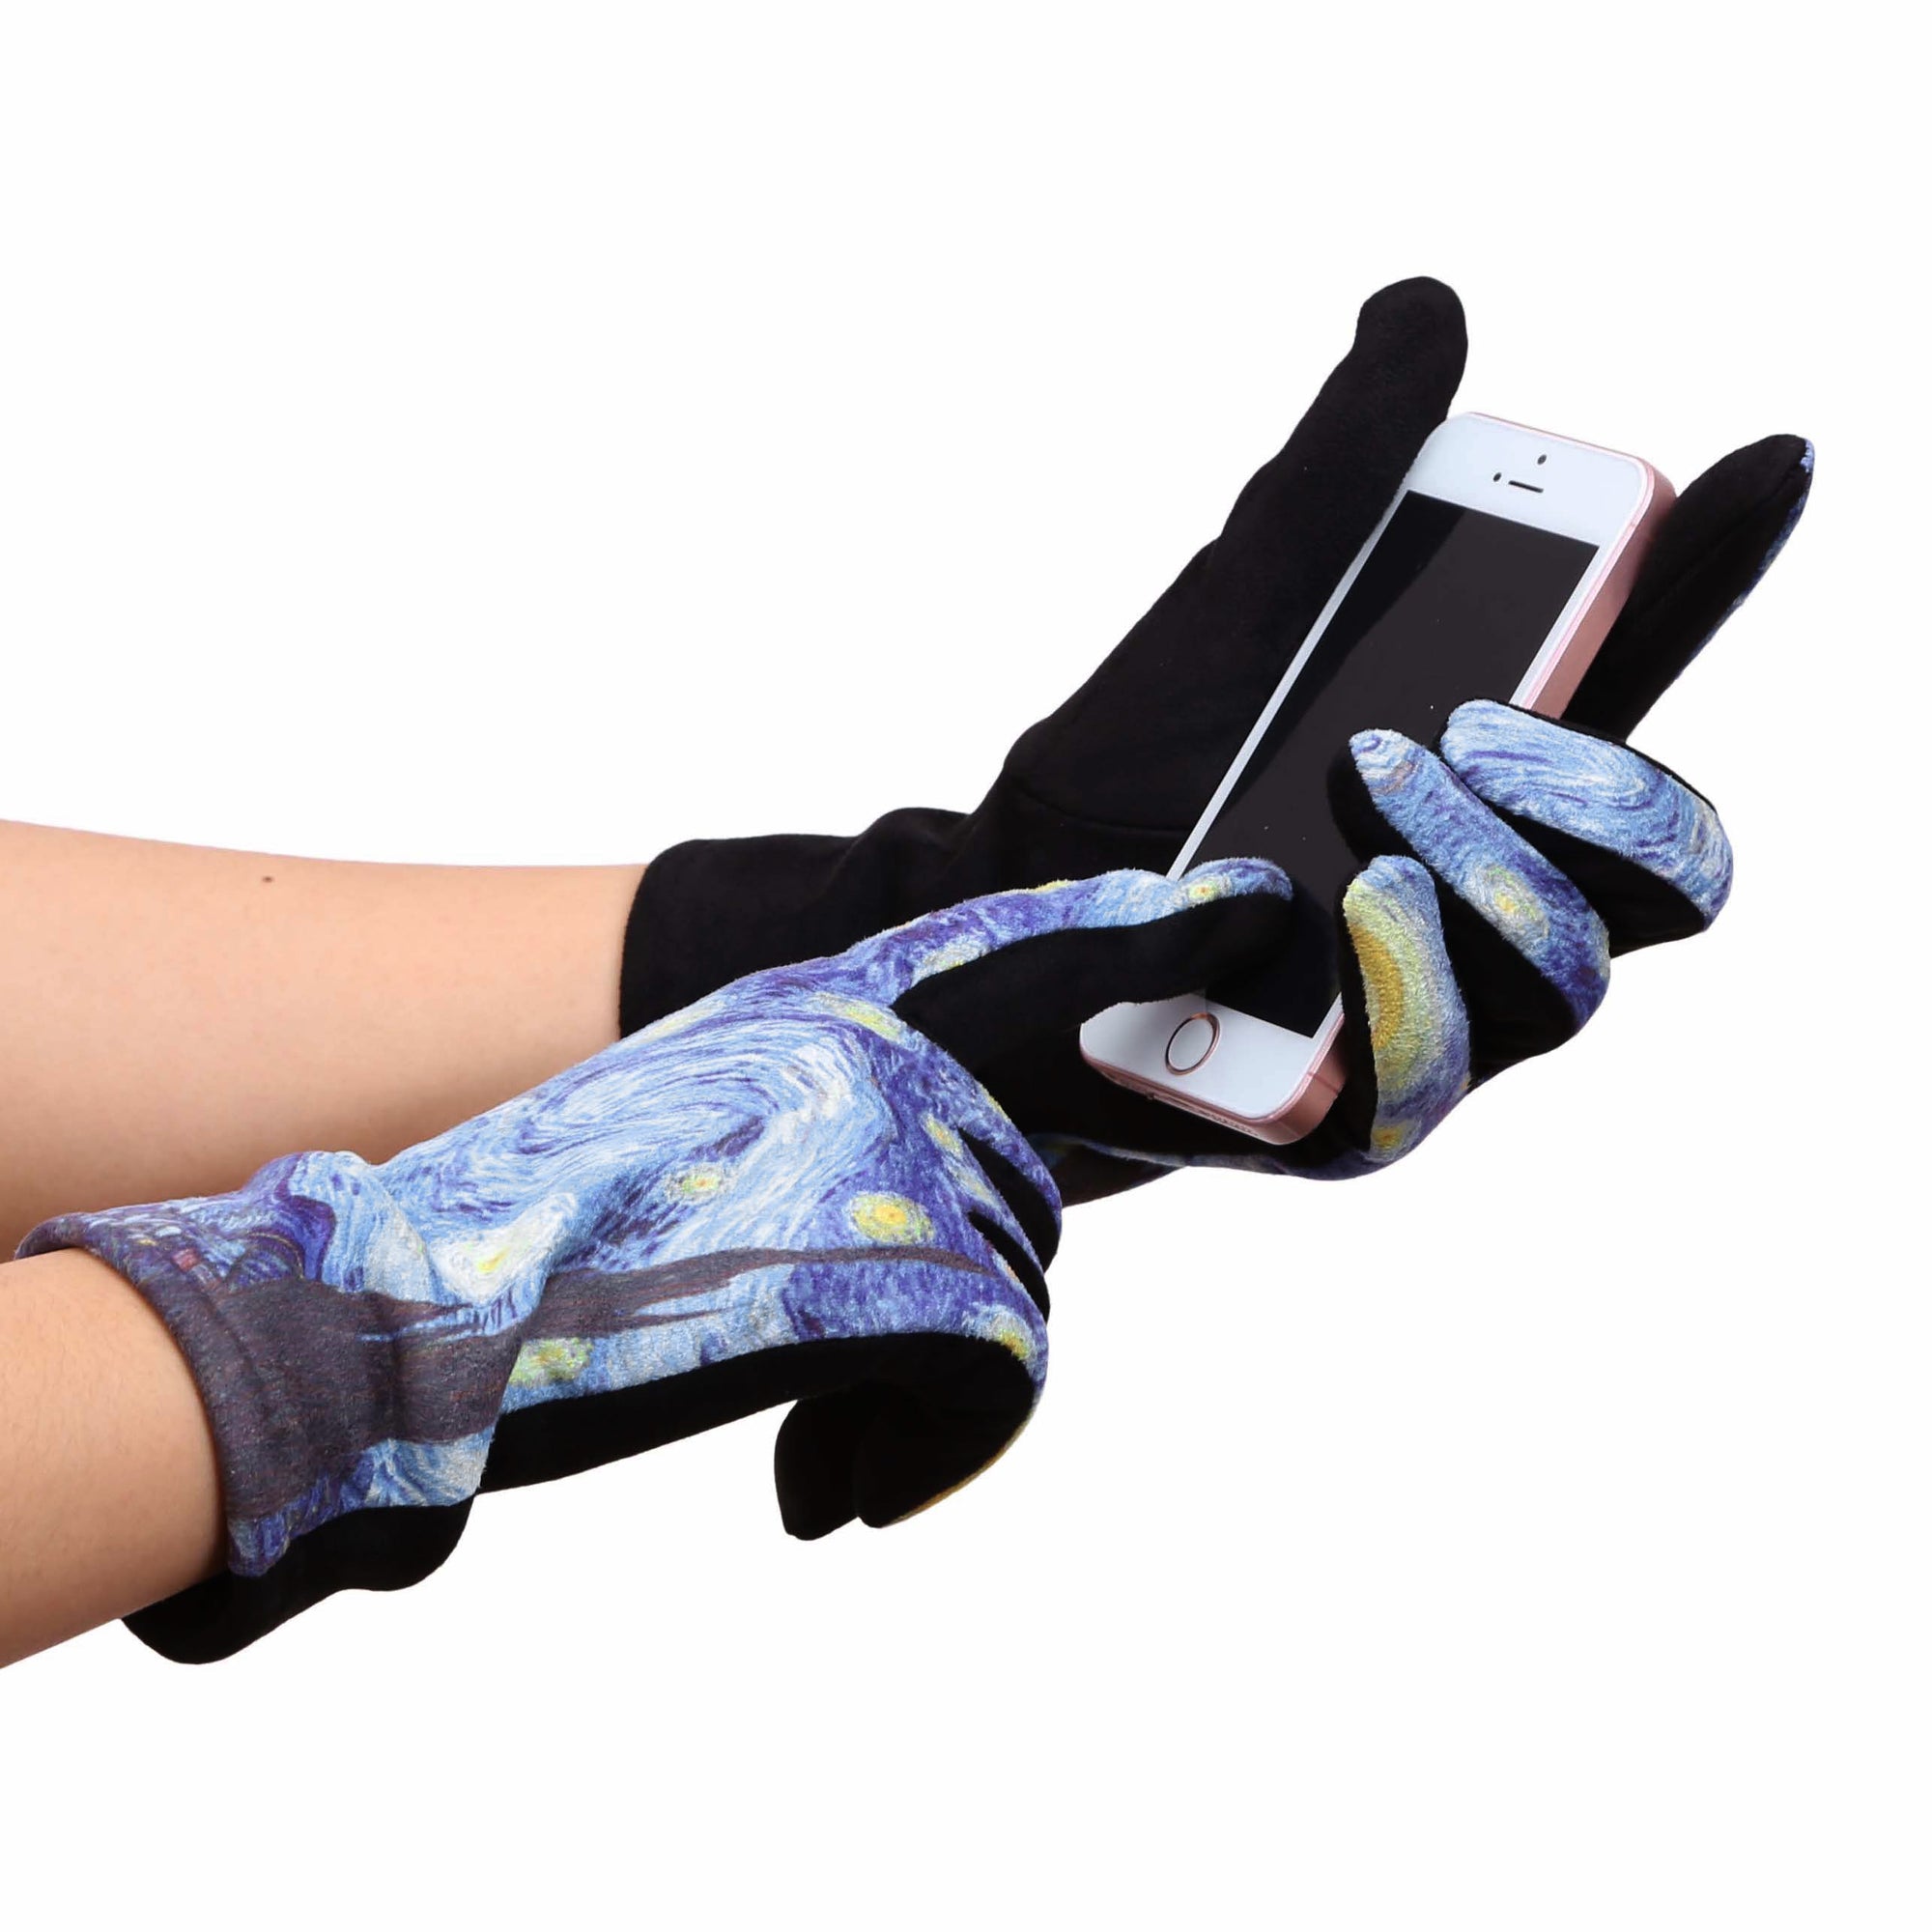 van Gogh Starry Night Texting gloves holding a smart phone 